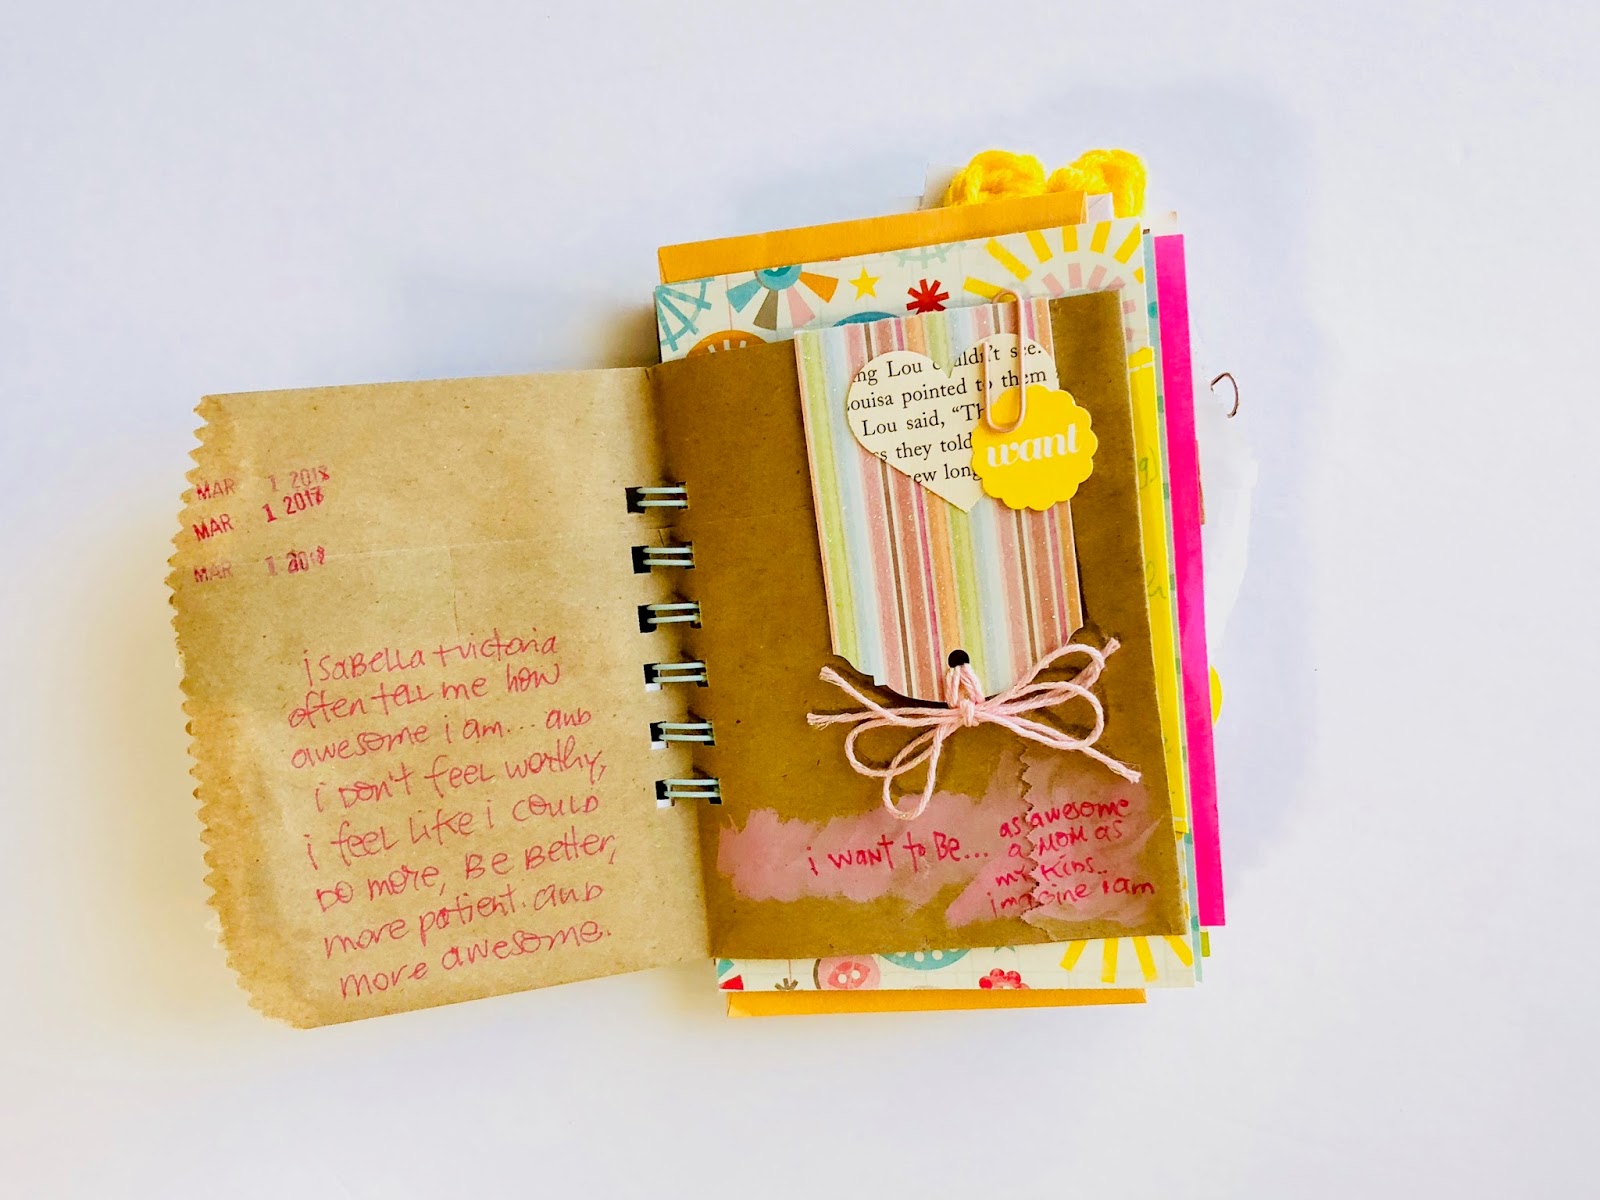 #30lists, #30 Days of Lists #list #lists #listing challenge #I Want to Be #journal #mini book #smashbook 